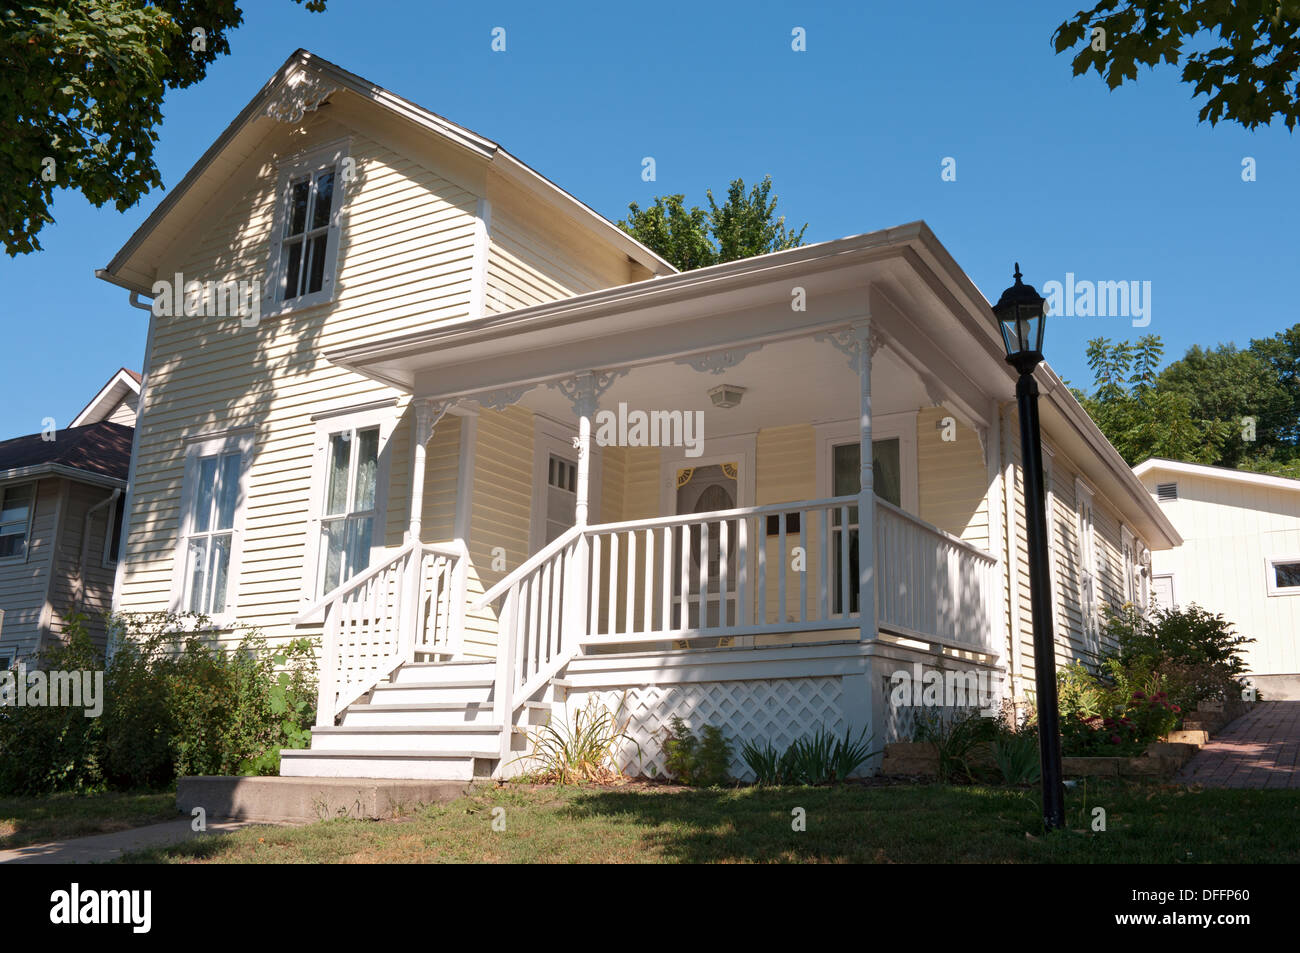 Famed local author Maud Hart Lovelace childhood residence now a museum in Mankato Minnesota Stock Photo